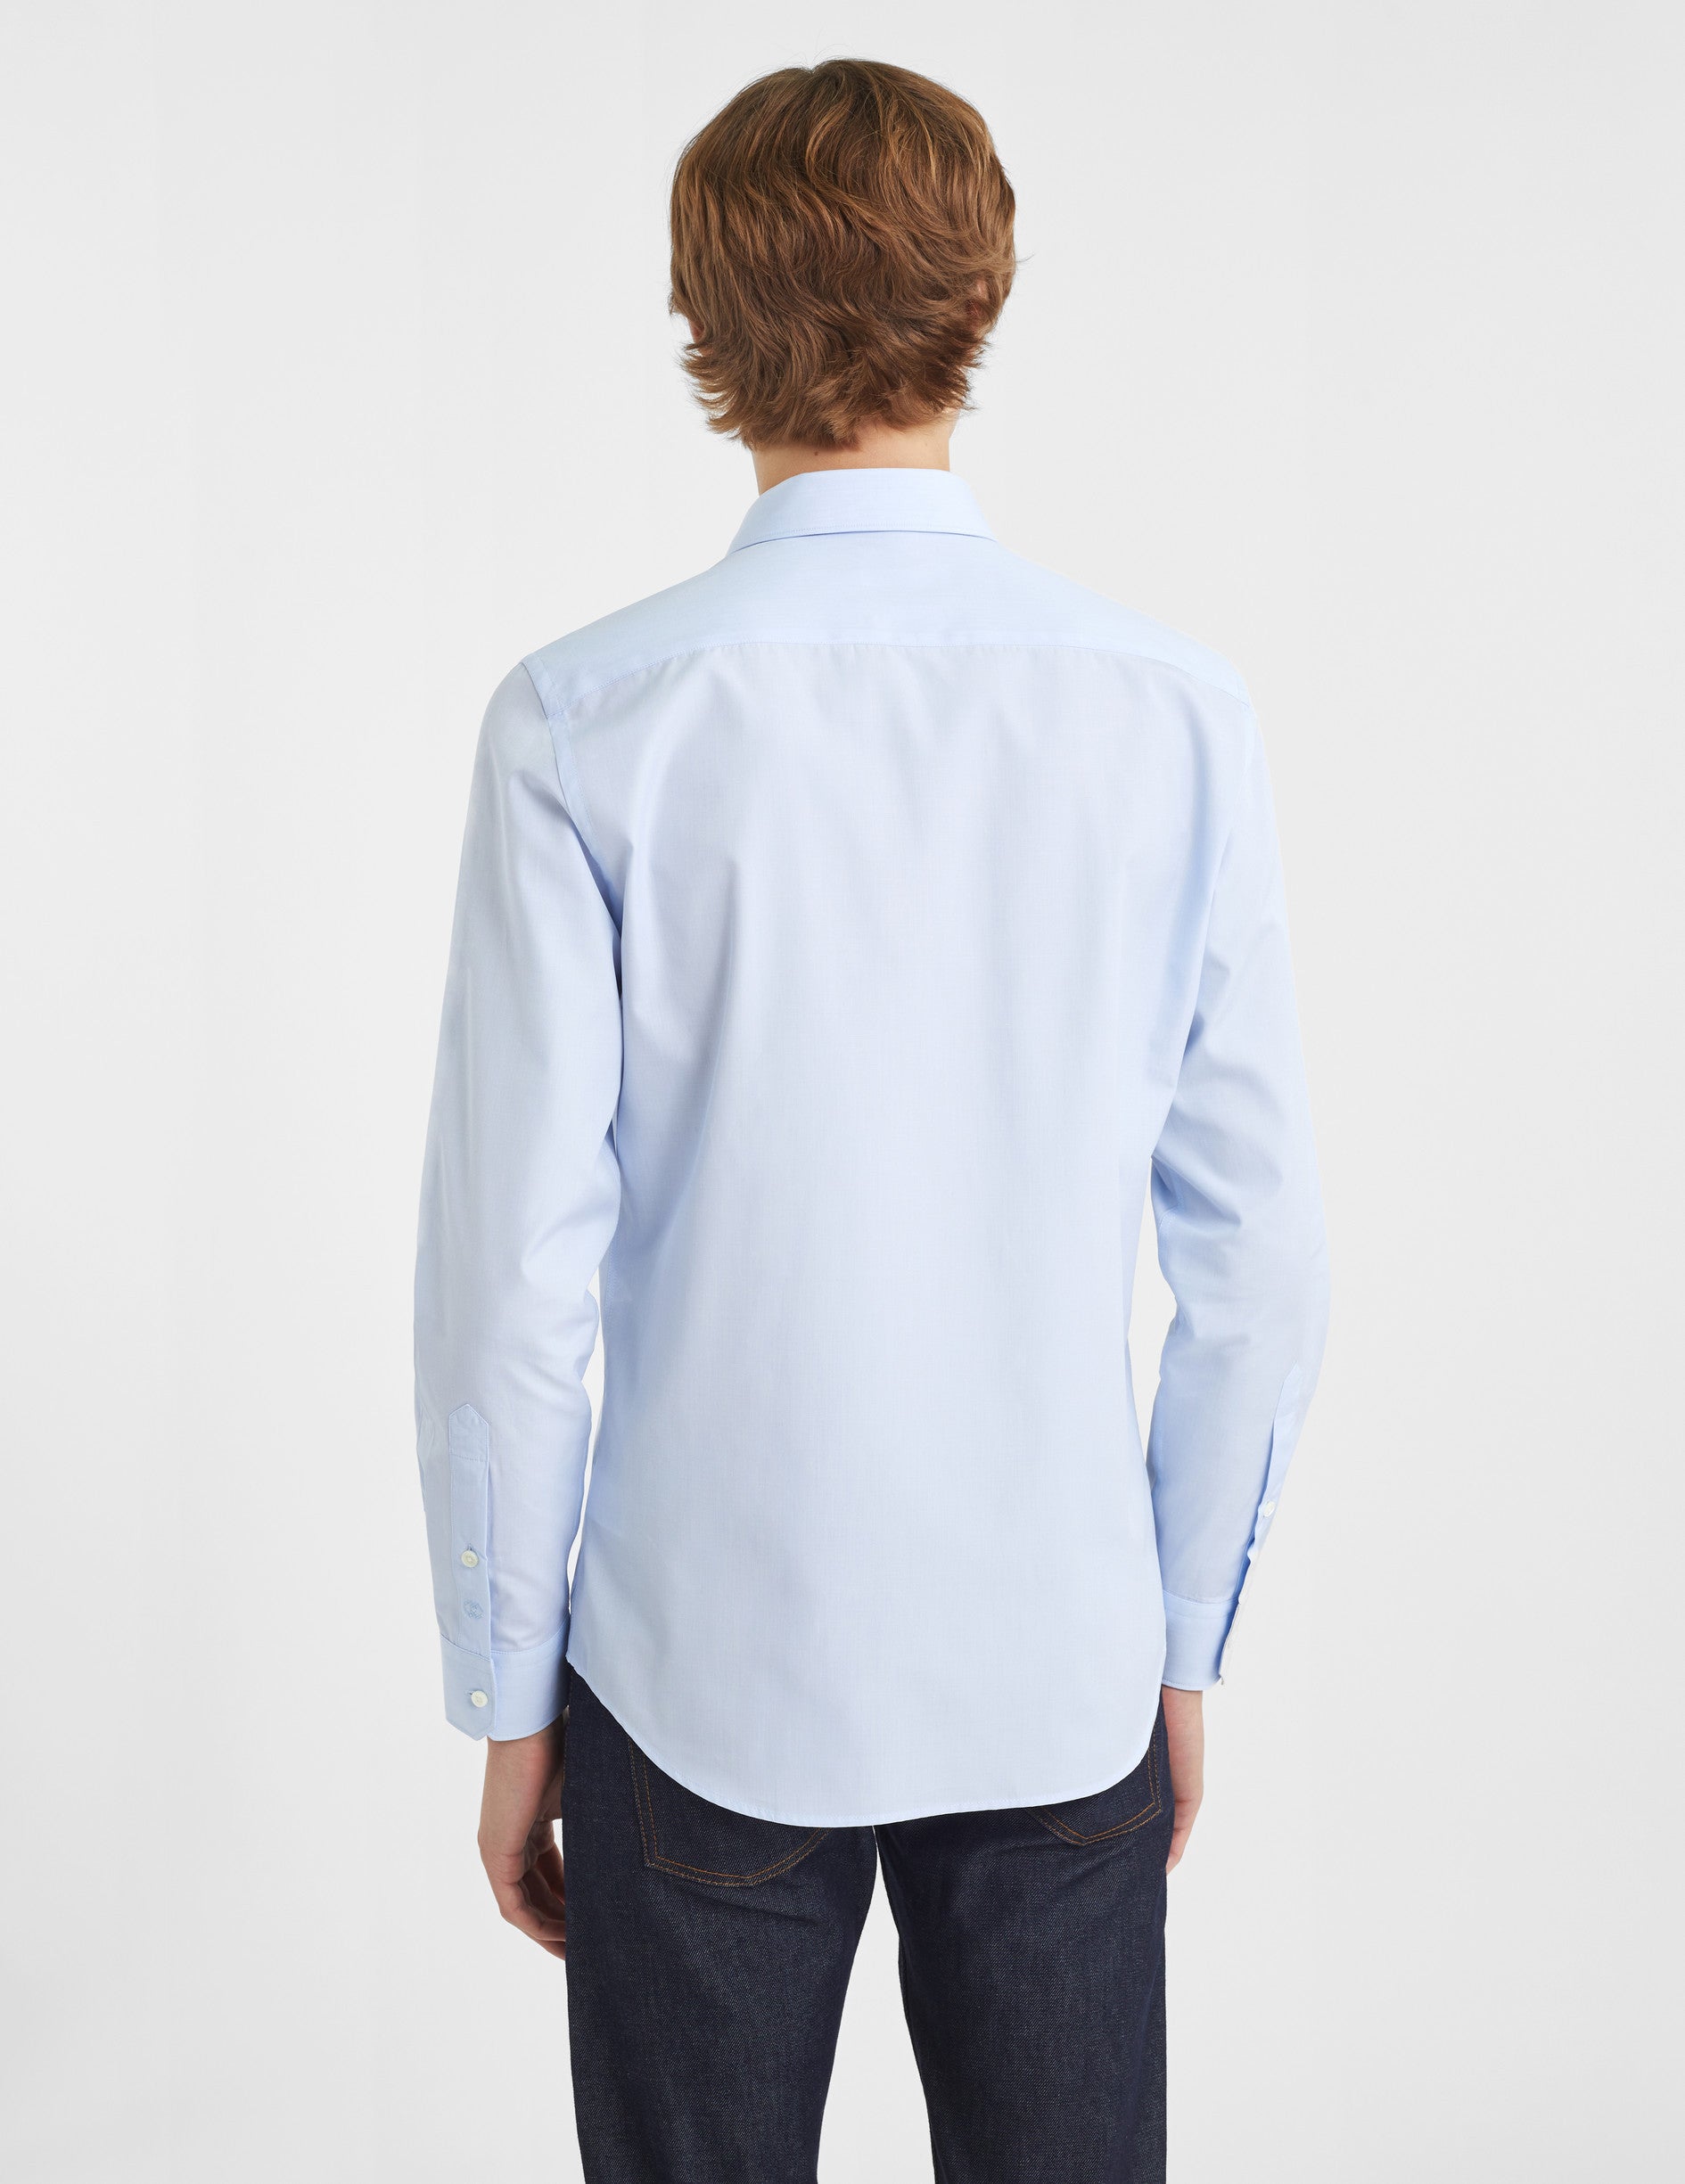 Fitted blue shirt - Wire to wire - Figaret Collar